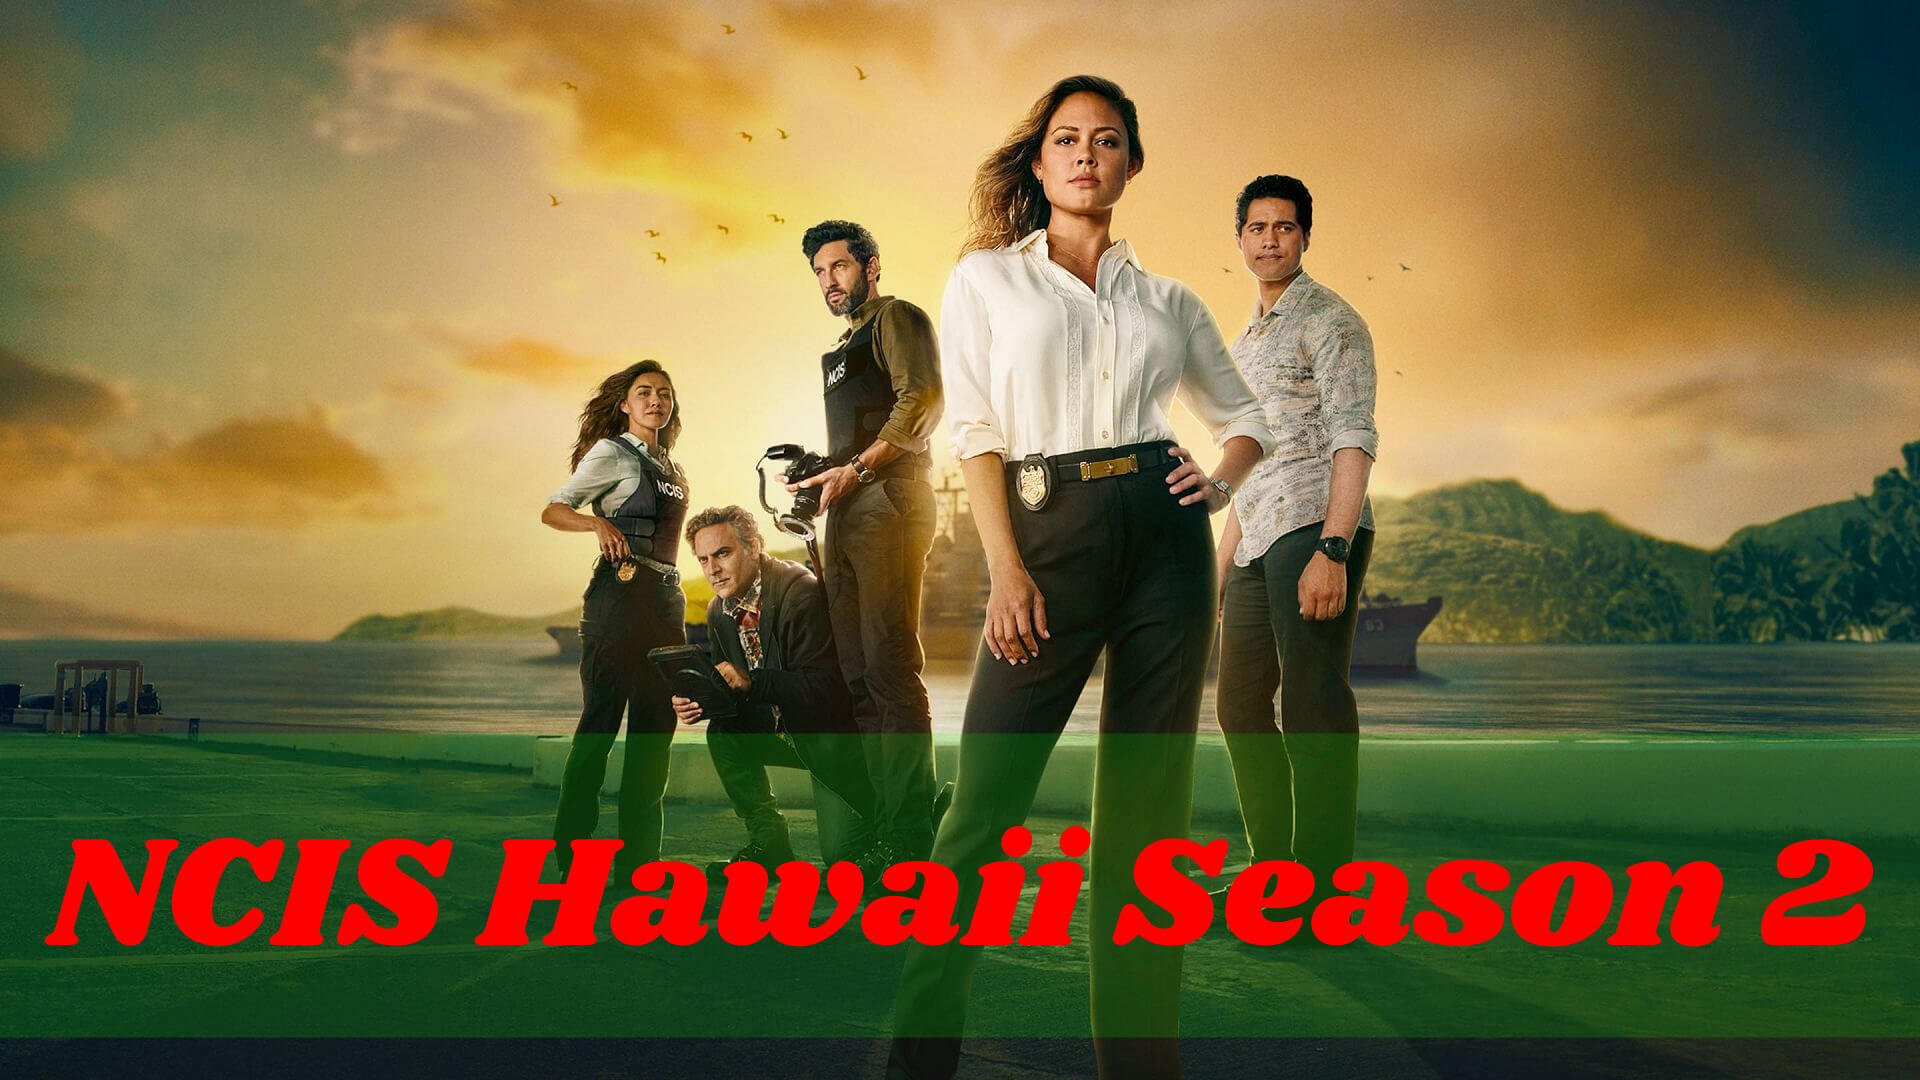 When Is NCIS Hawaii Season 2 Coming Out? (Release Date)